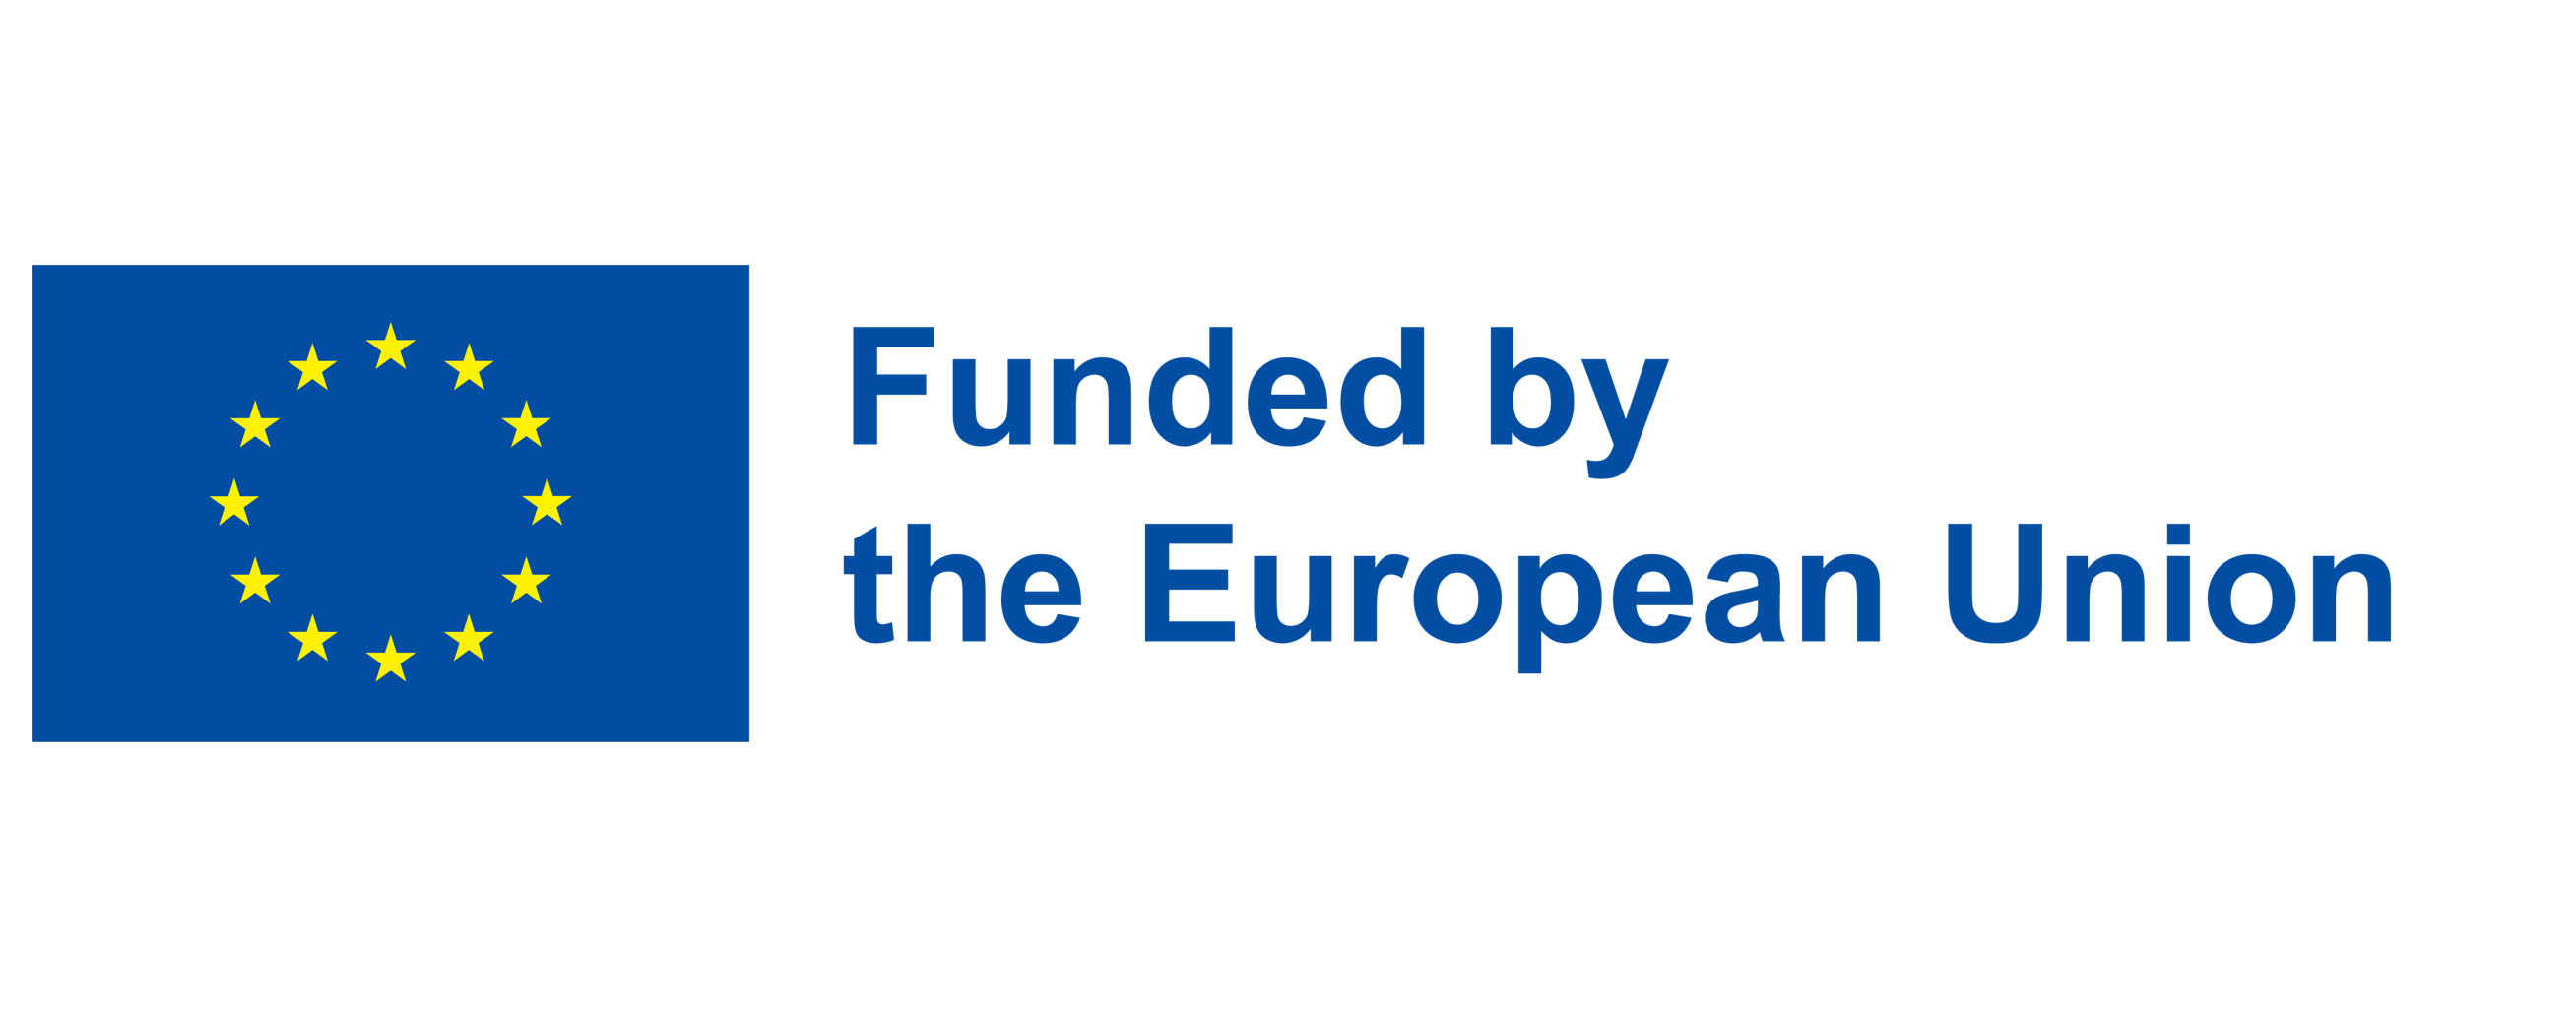 Project funded by the European Union